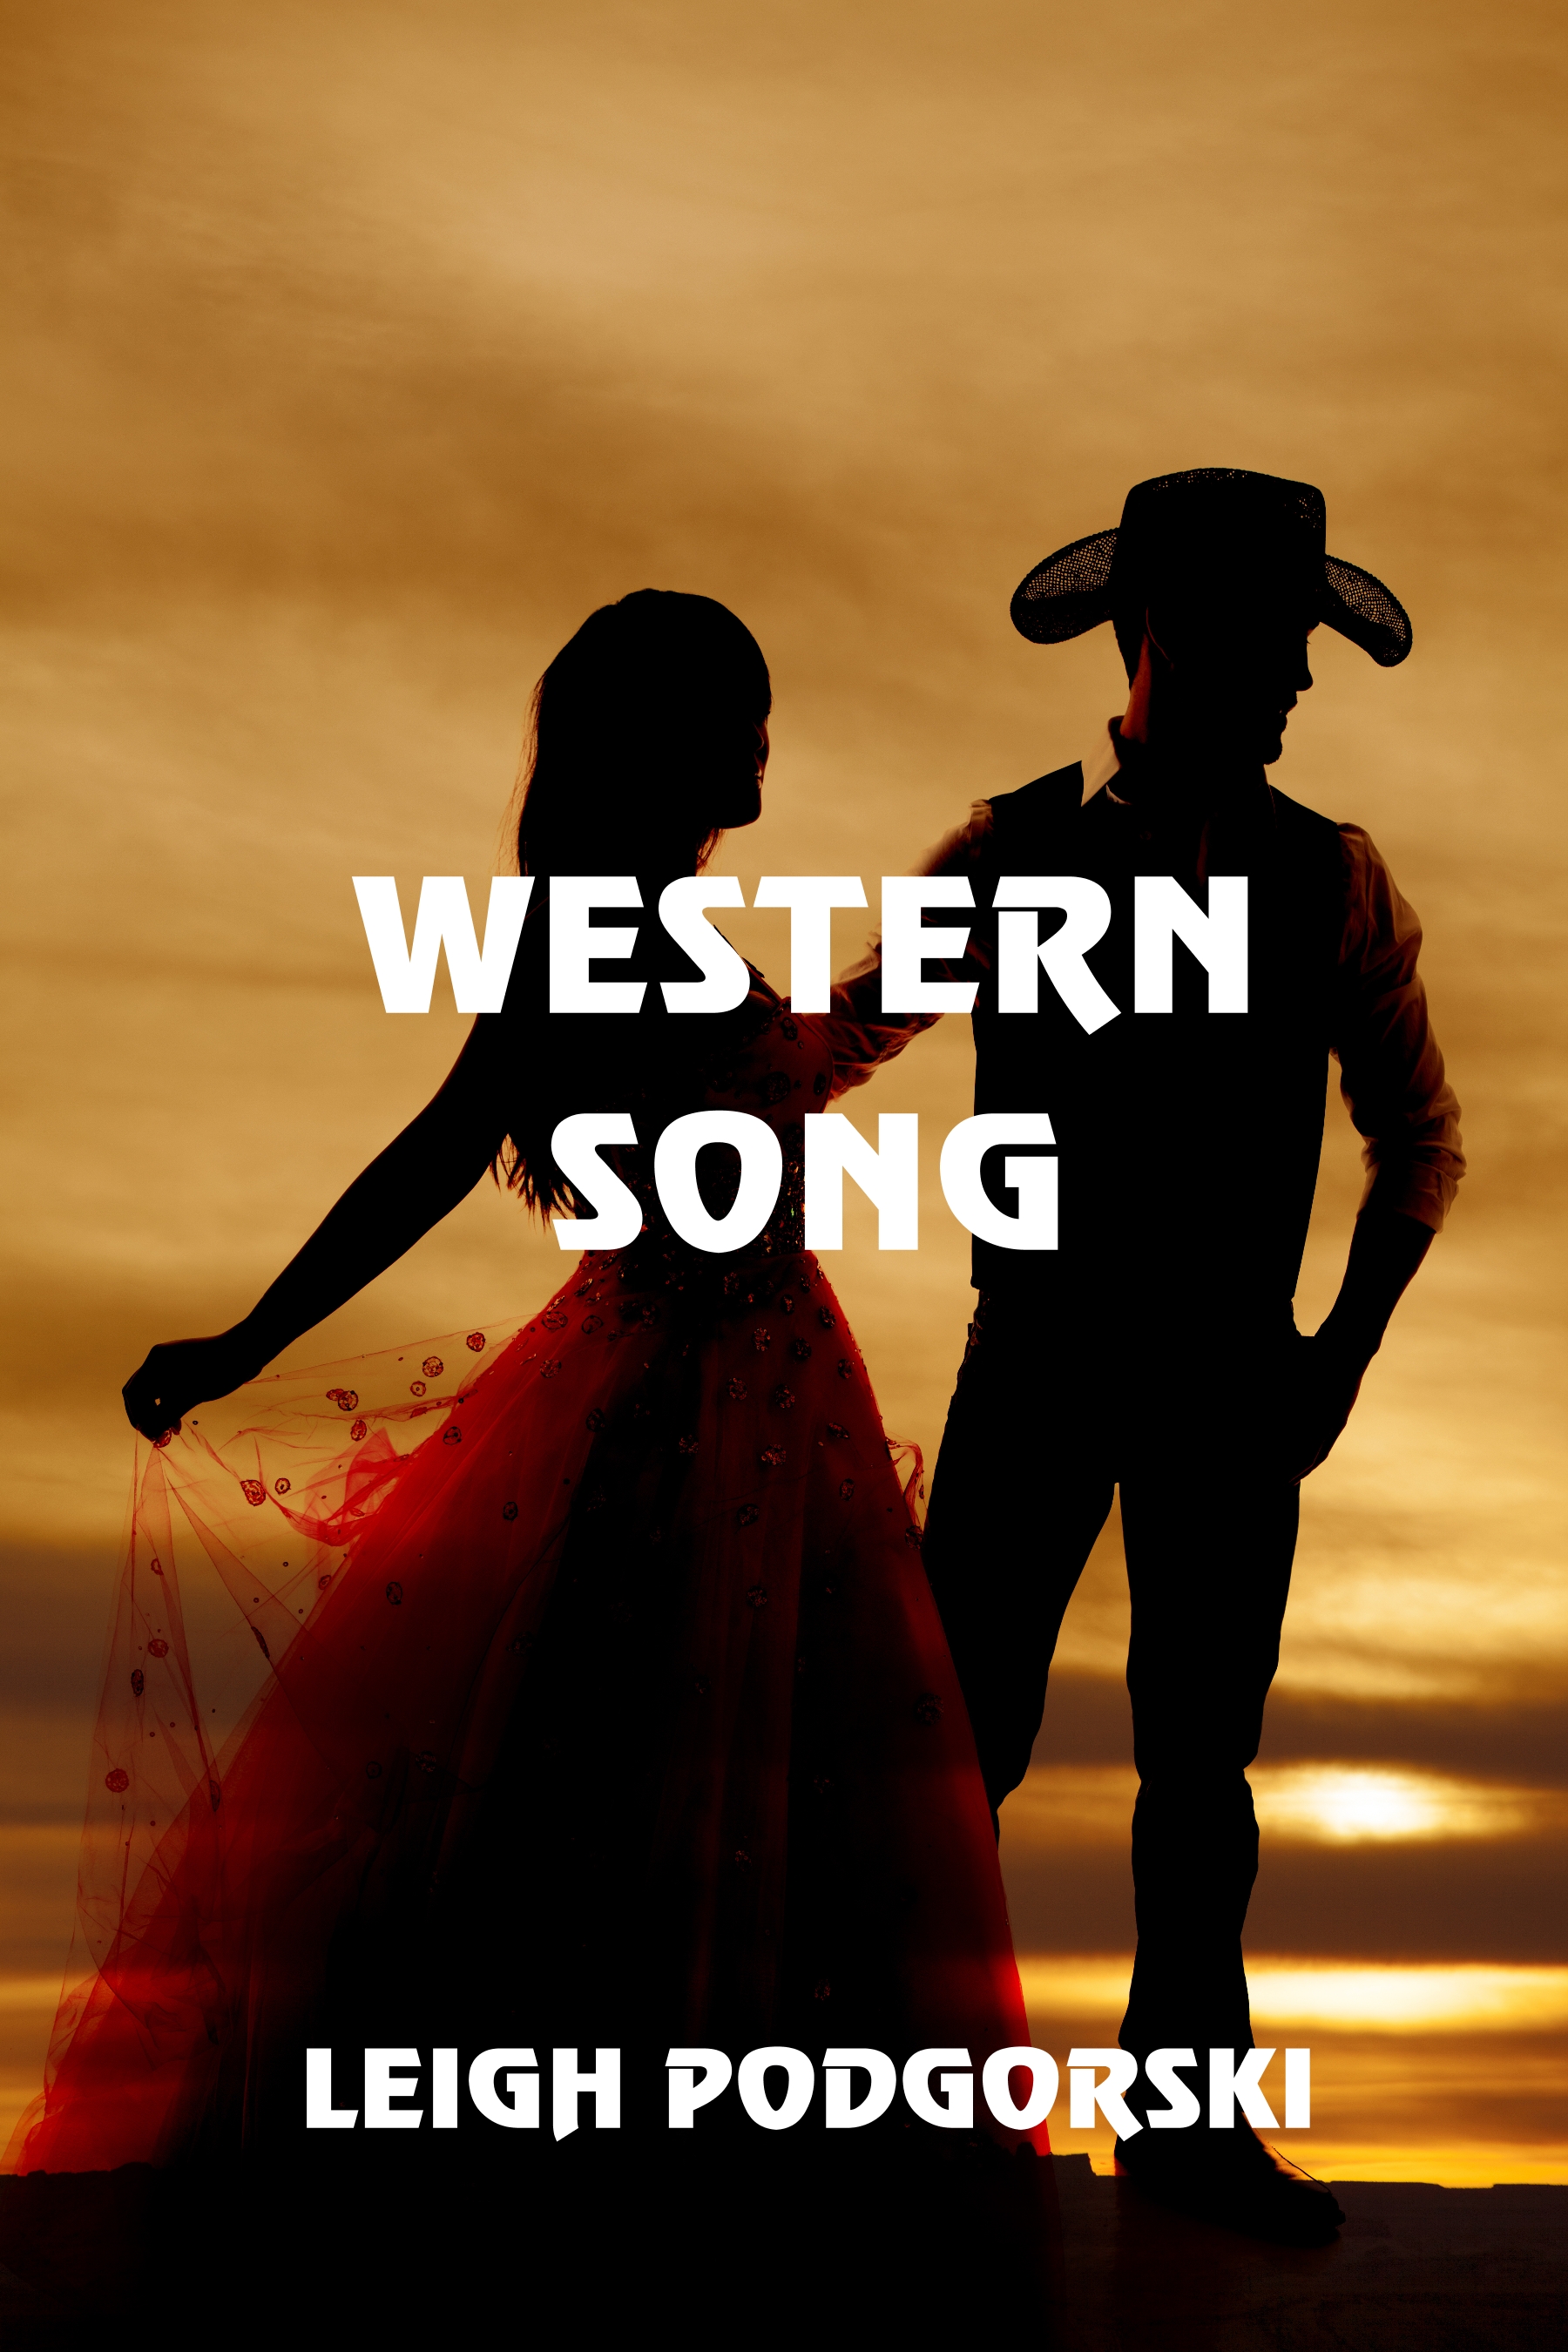 FREE: Western Song by Leigh Podgorski